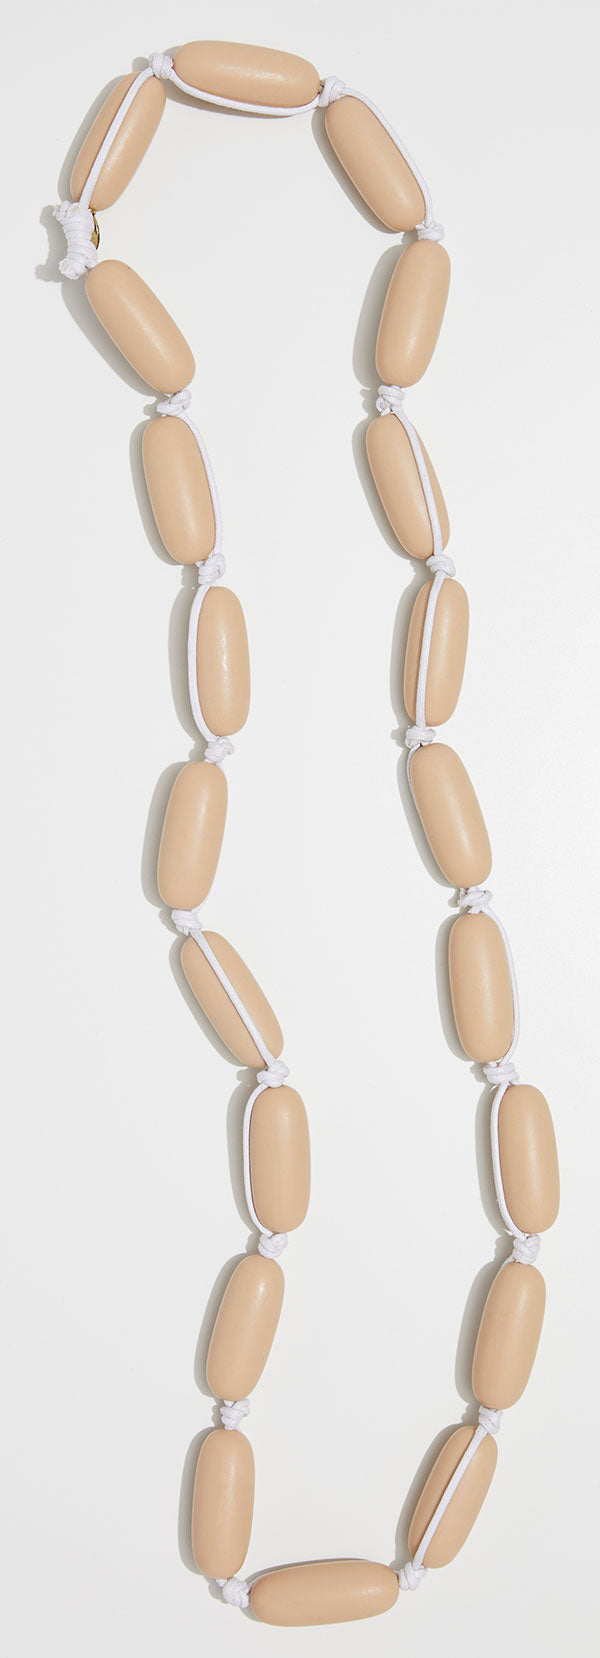 Evie Marques Original necklace Caramel on white cord